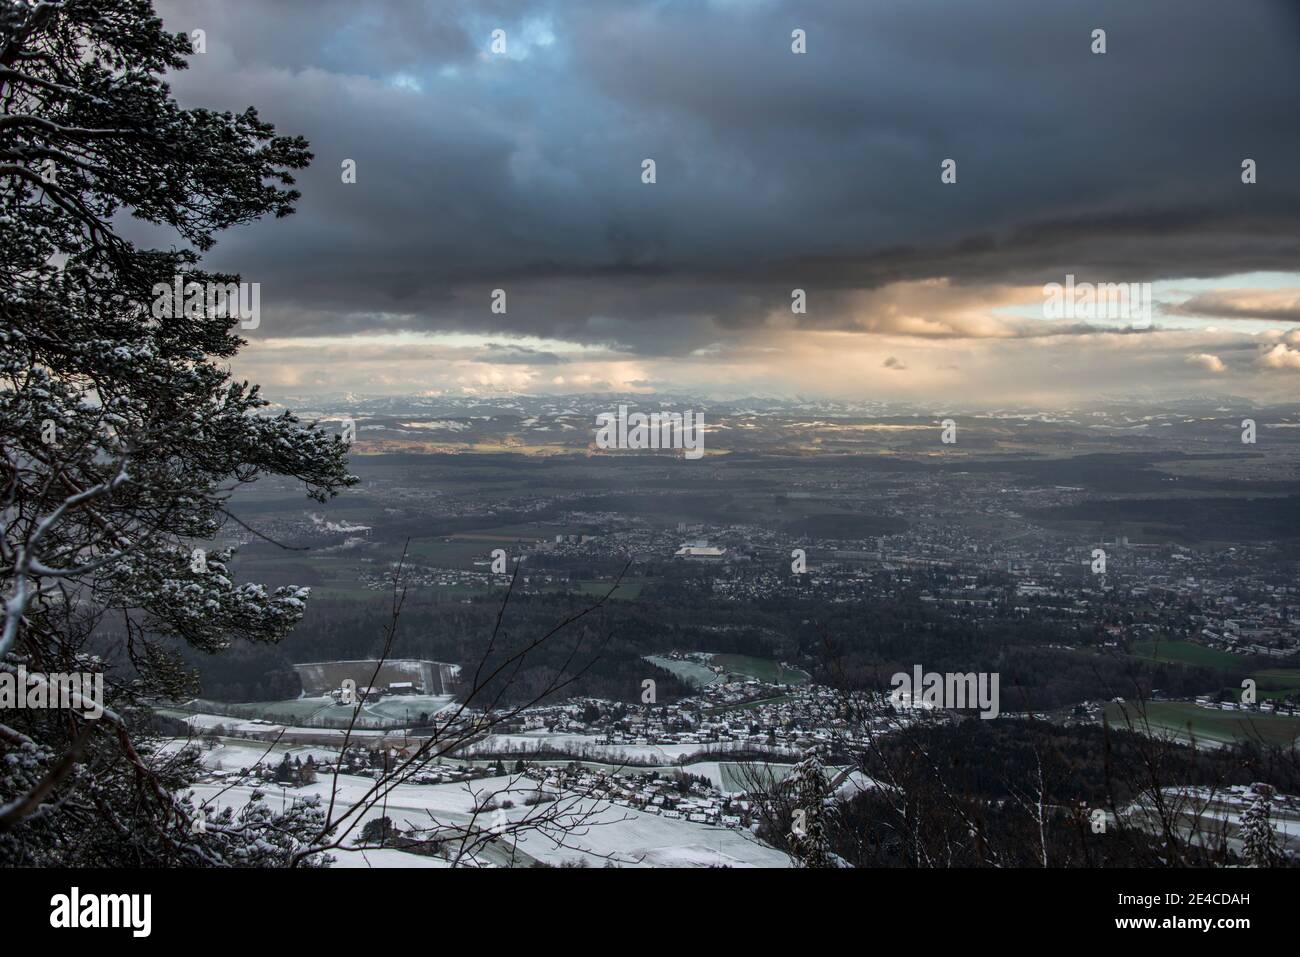 Bad weather front in winter Stock Photo